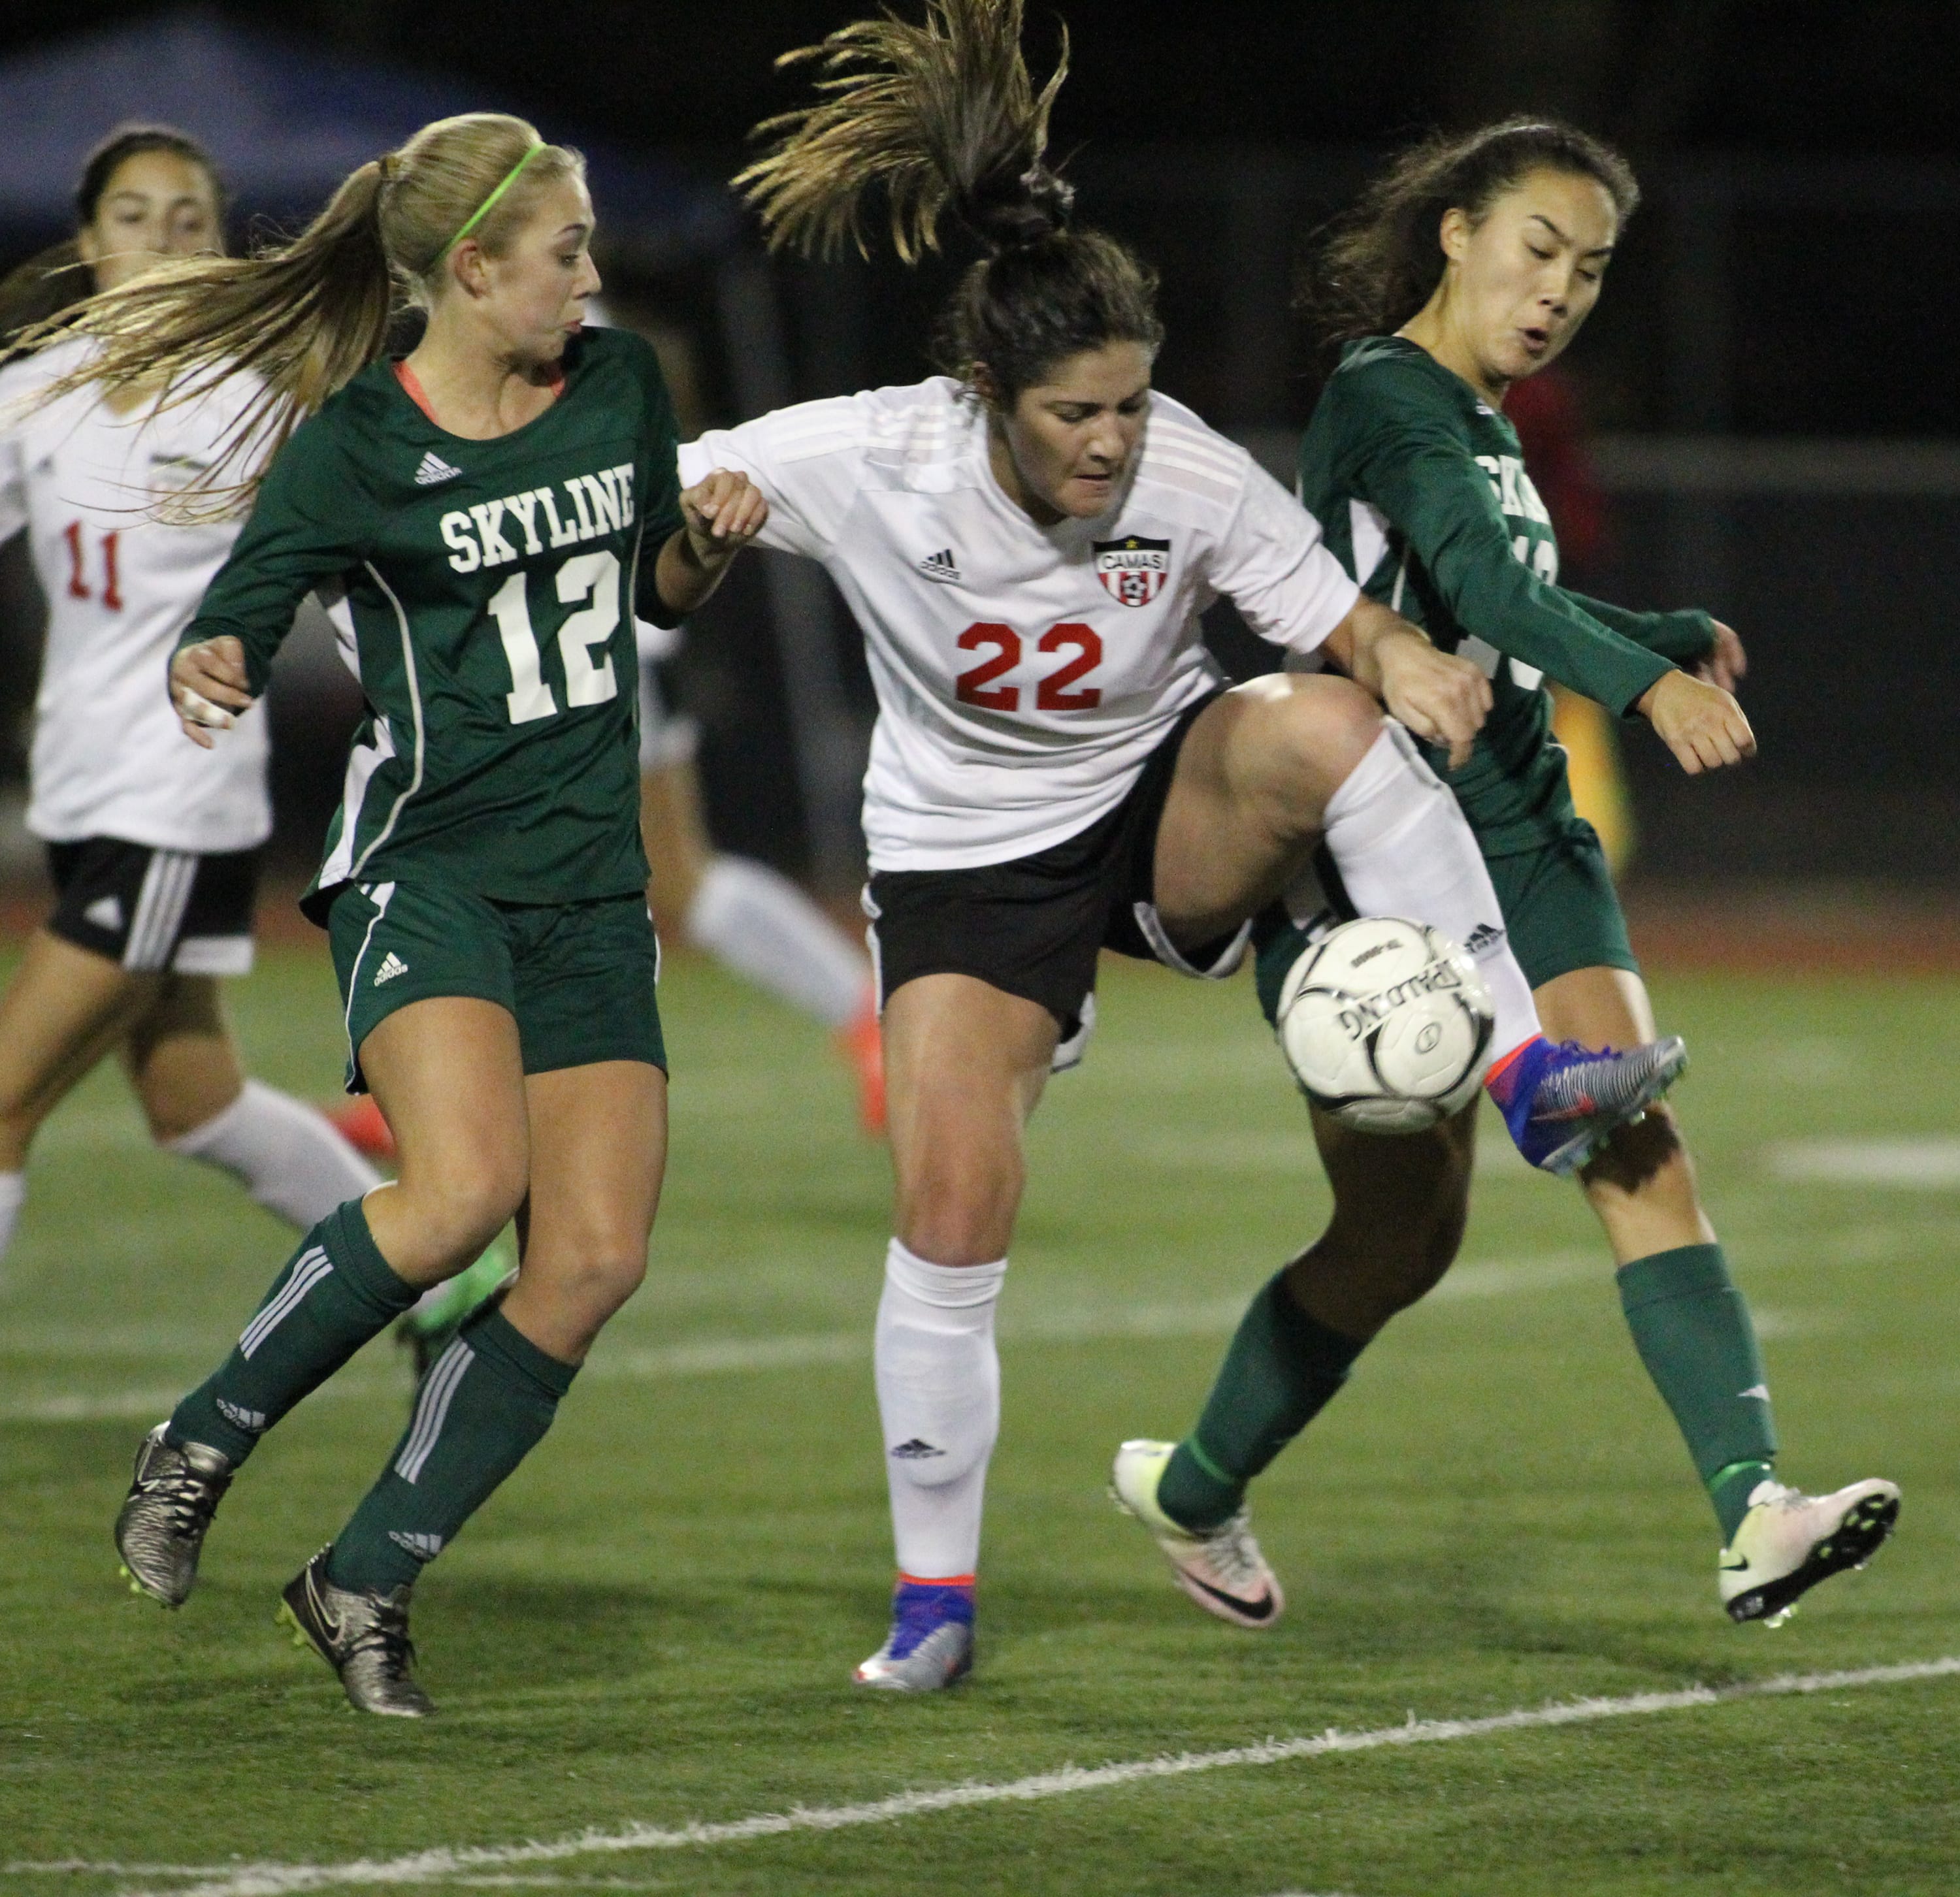 Camas Papermakers' Alyssa Tomasini (22) fighs for ball conrol with Skyline Spartans' Clare Wate (12) and Julia Mitchell (16)in the WIAA 4A Semifinal Women's soccer match held Friday, November 18, 2016 at  Sparks Stadium in Puyallup, WA. Tomasini kicked the winning goal in he 75th min to give the Papermakere a 1-0 win over the Spartans to advance to the championship match which will be held at 4 PM at Sparks Stadium in Puyallup.